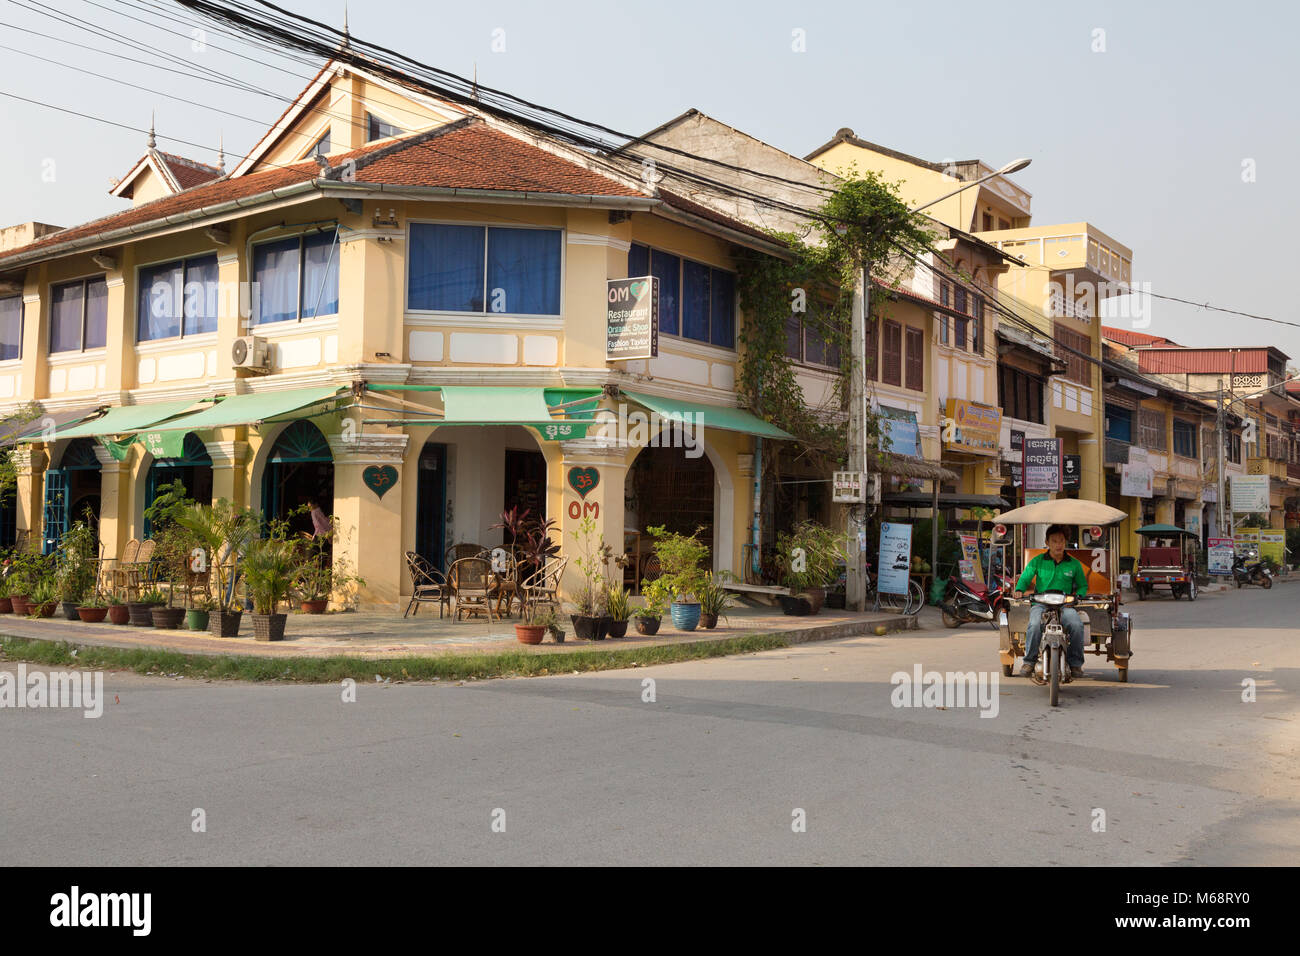 Street scene with french colonial buildings and tuk tuk, Kampot town, Cambodia Asia Stock Photo